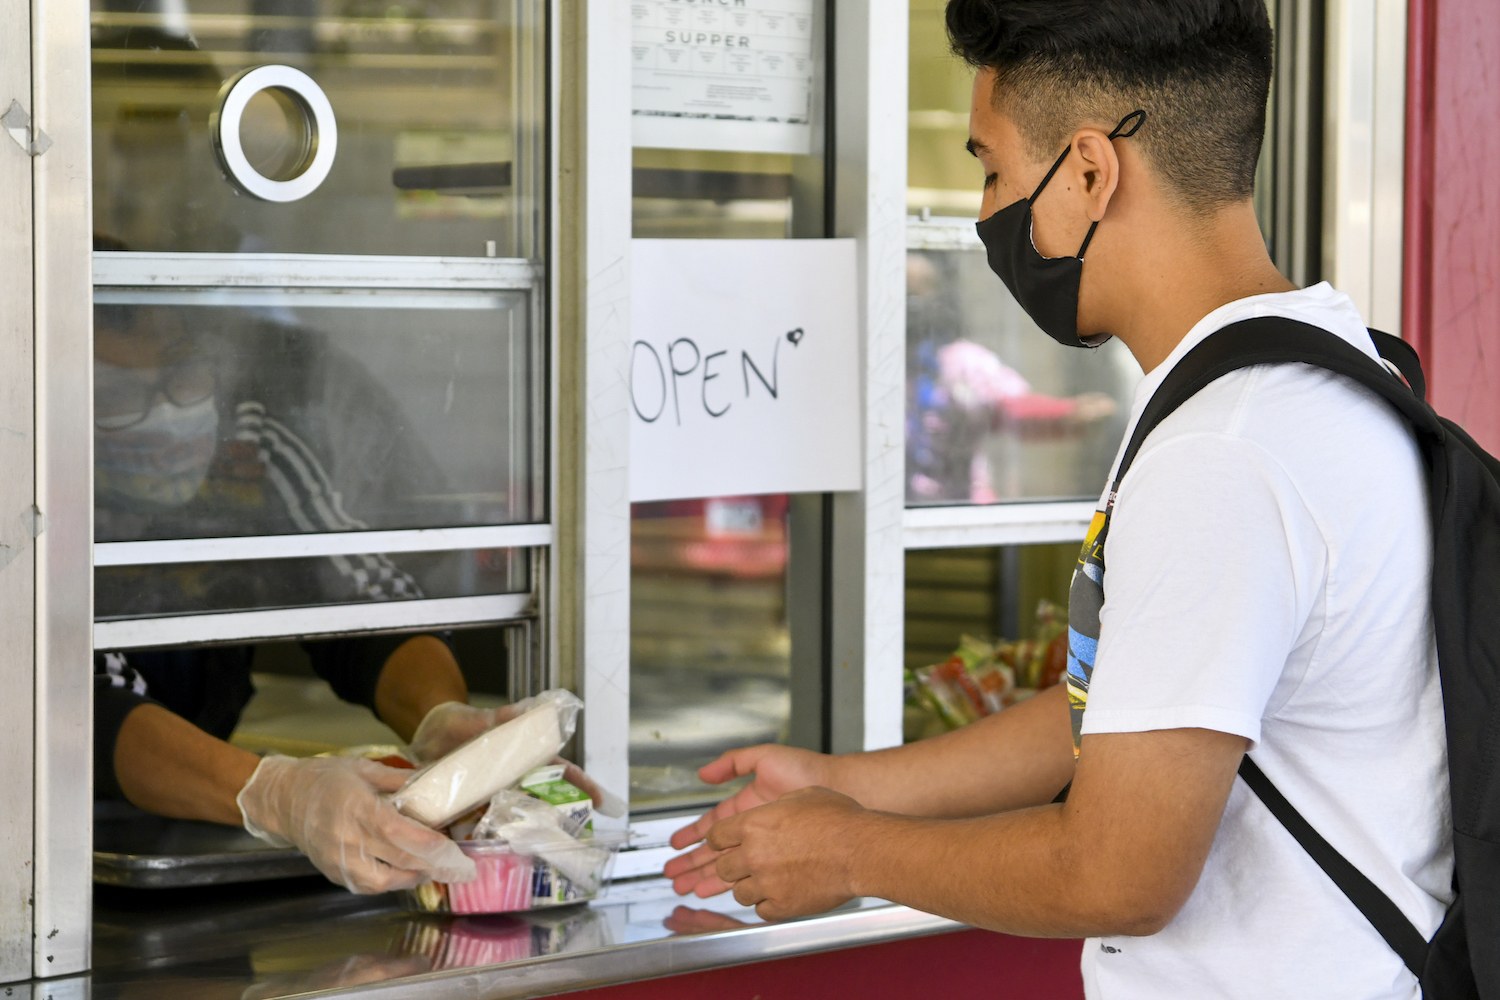 A returning student receives pre-packaged lunch at Hollywood High School on April 27, 2021 in Los Angeles, California.